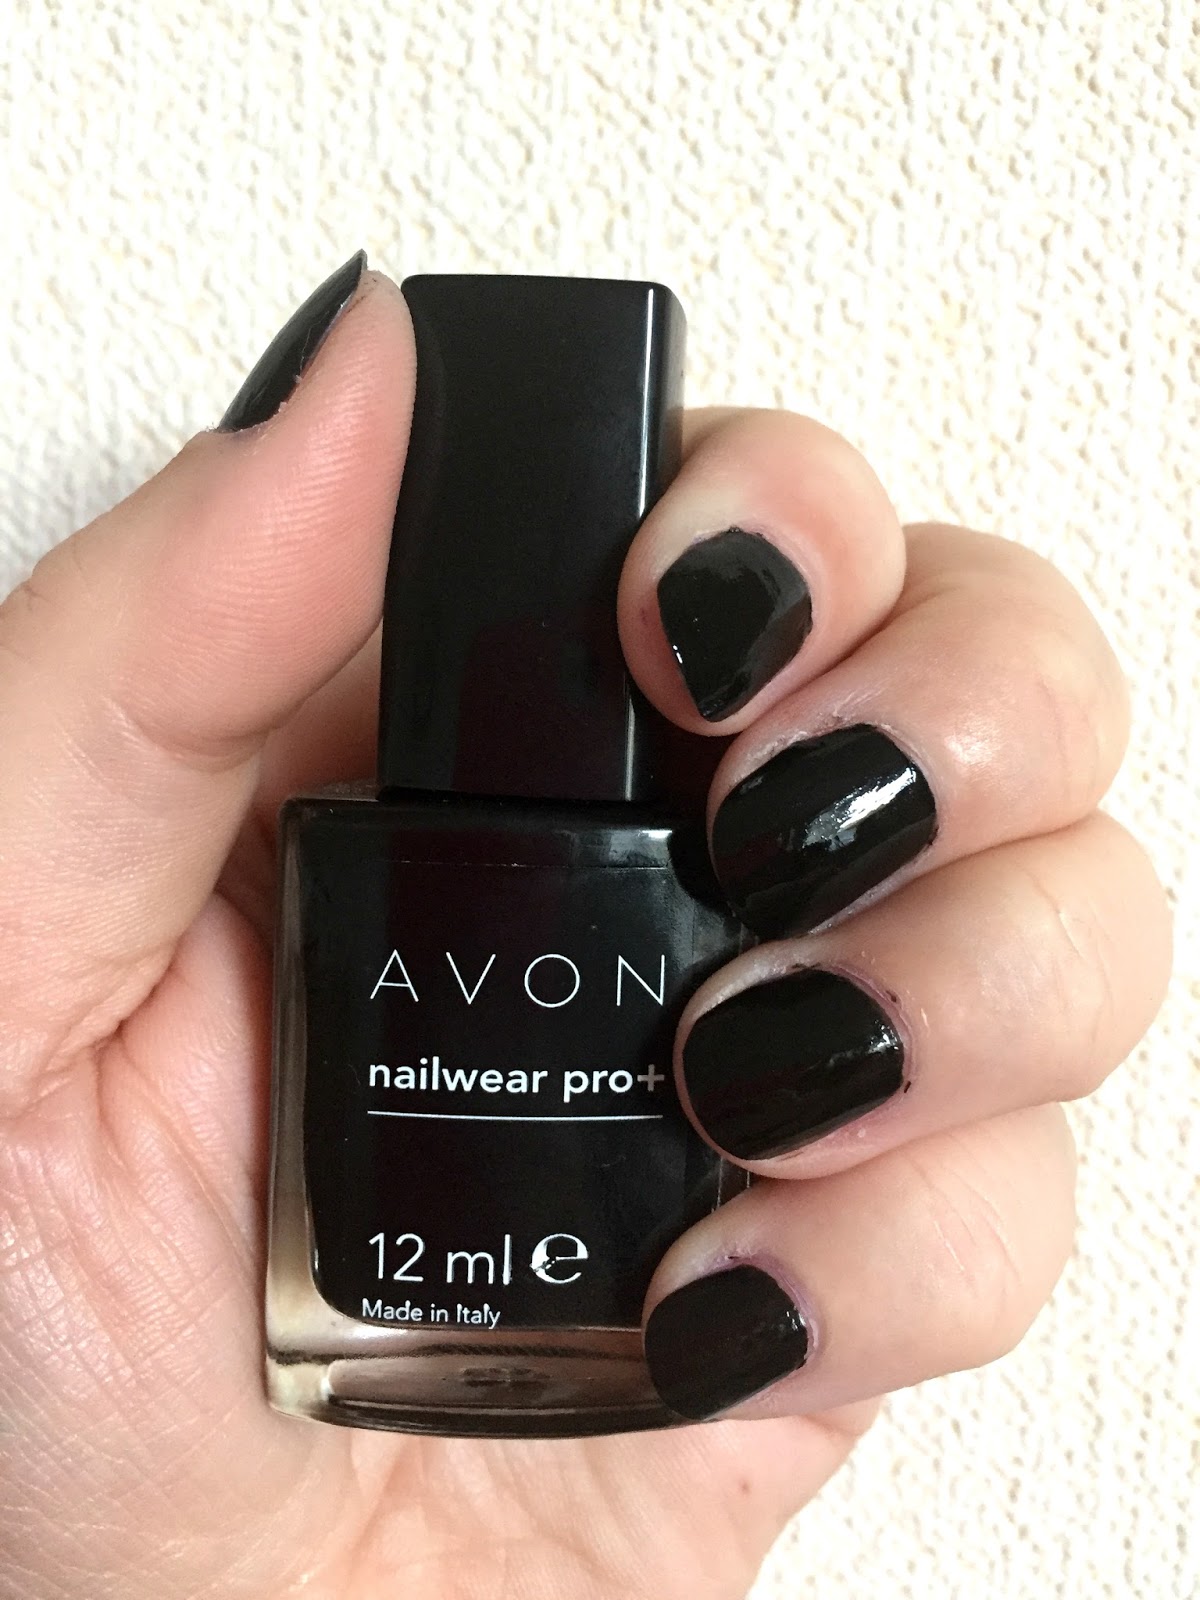 Avon Nailwear Pro Nail Enamel Intense Brights: Review and Swatches |  Divassence!